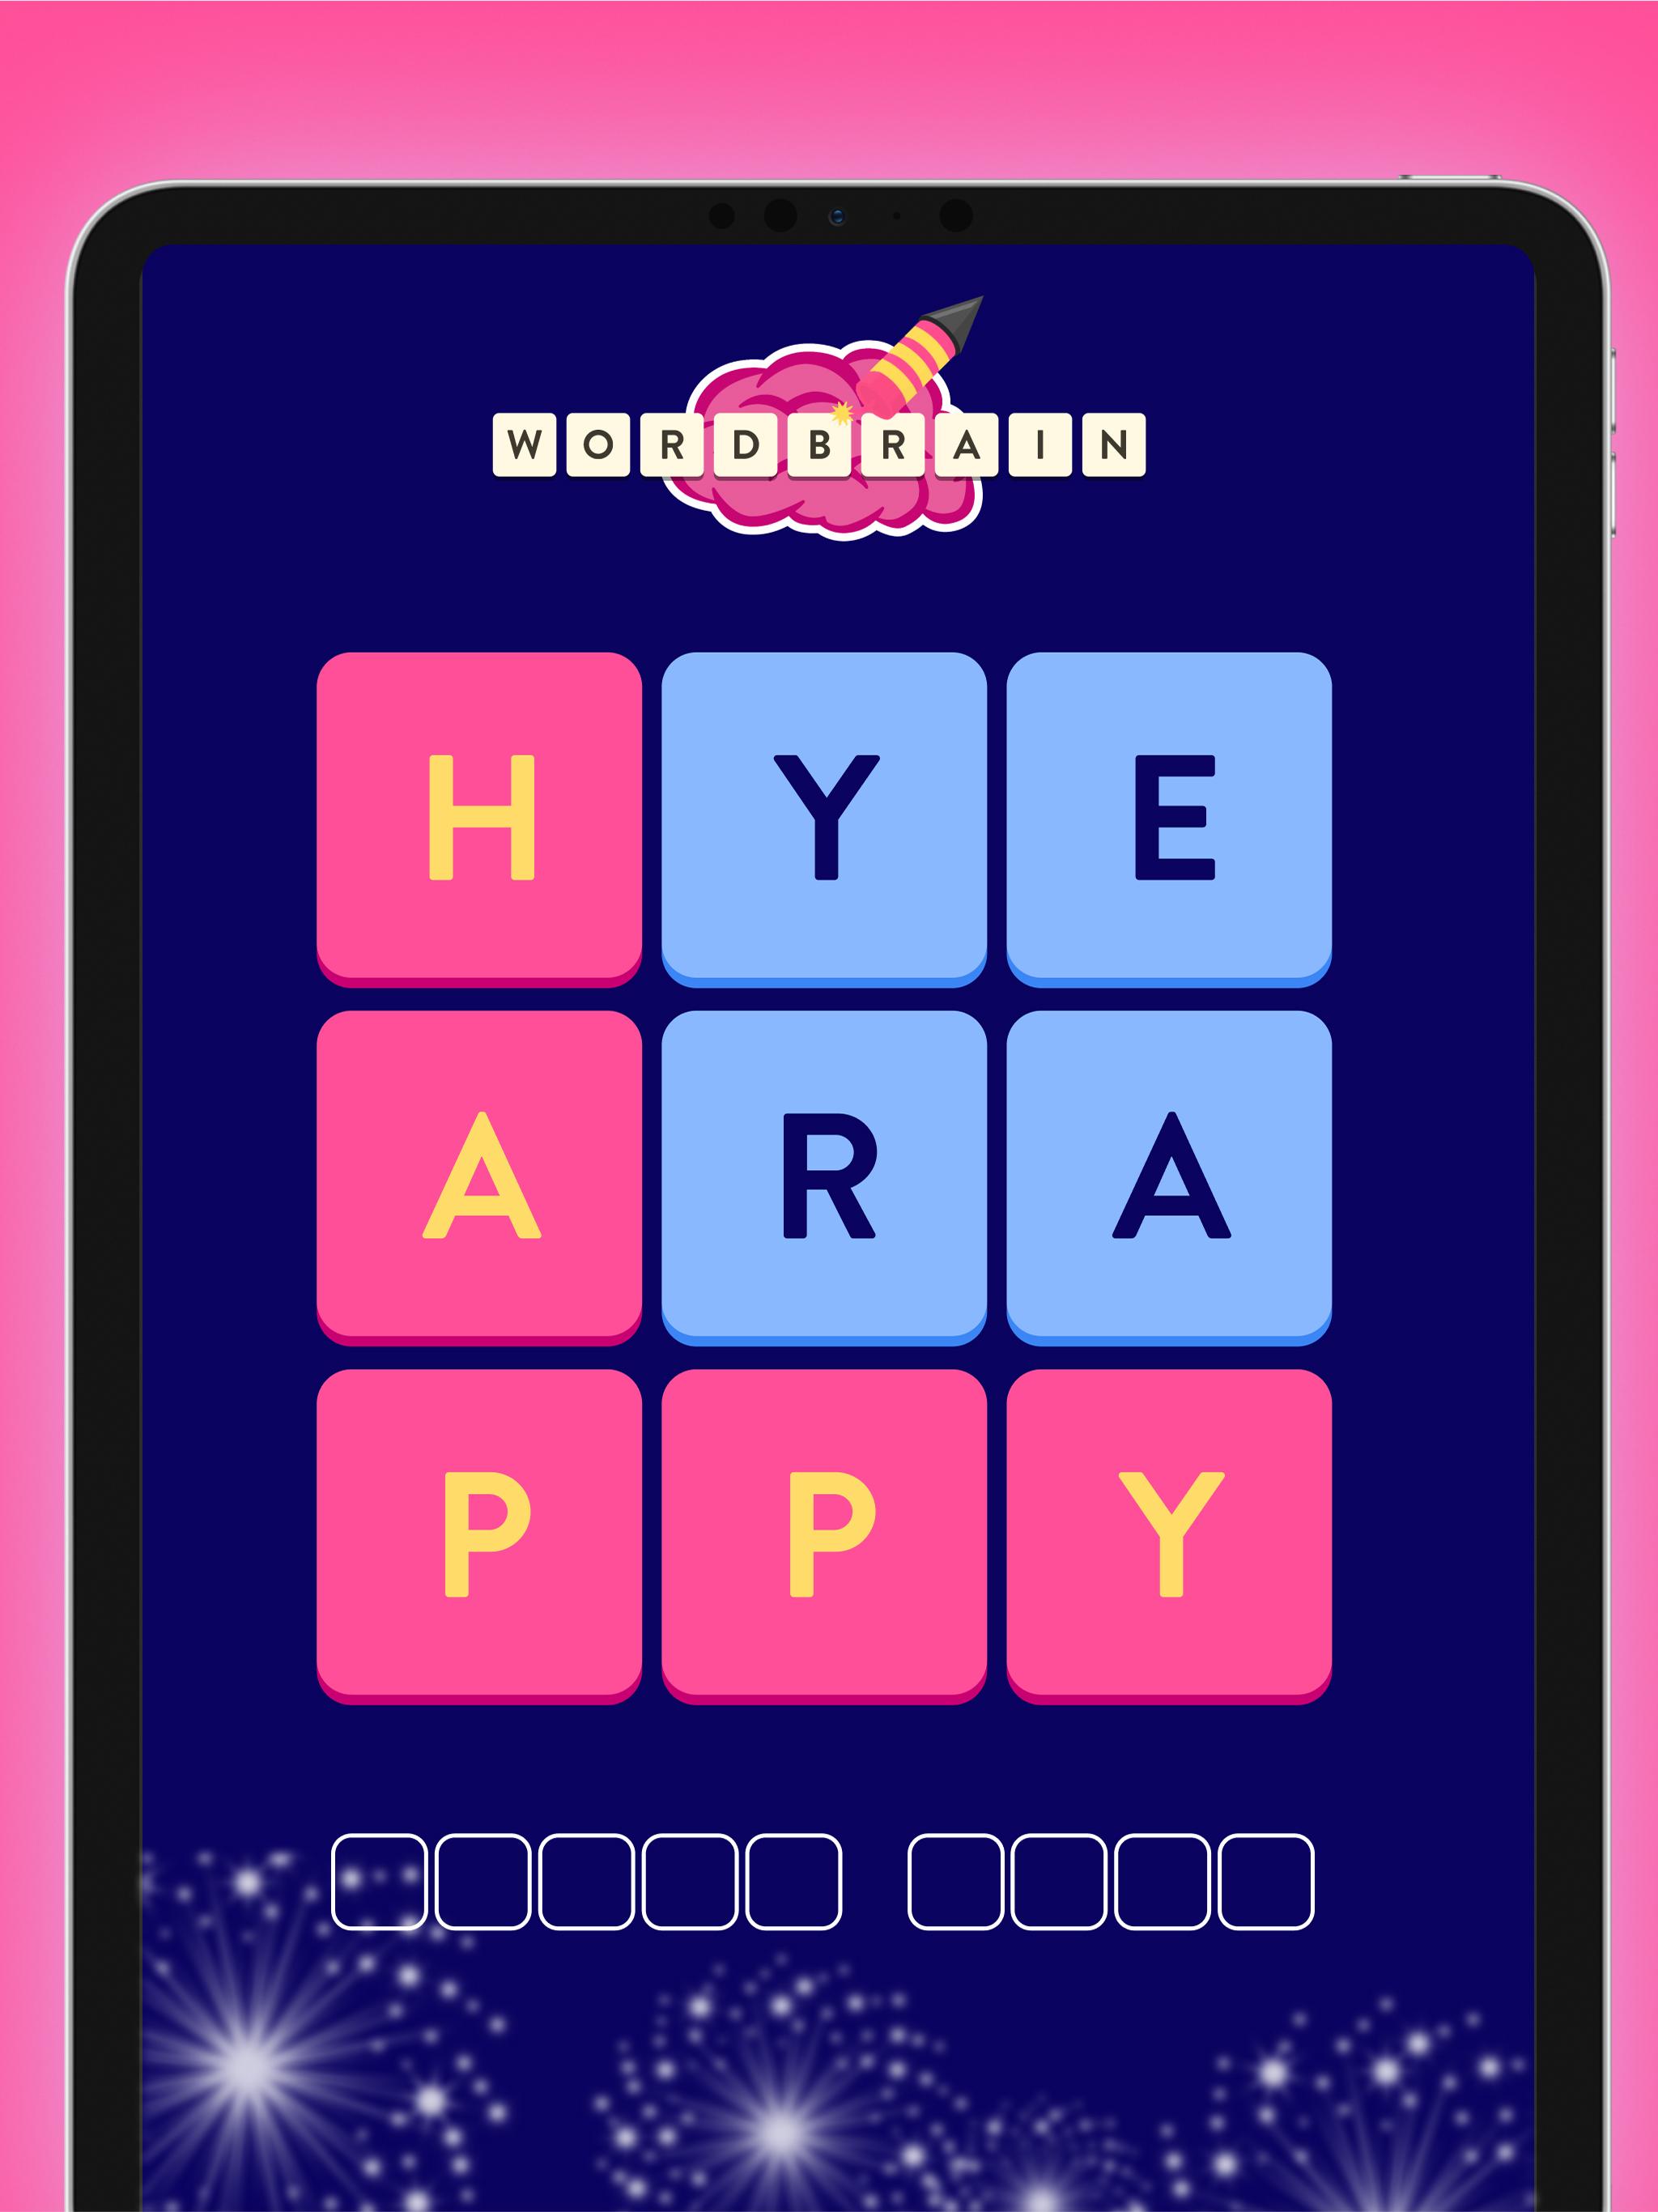 Wordbrain For Android Apk Download